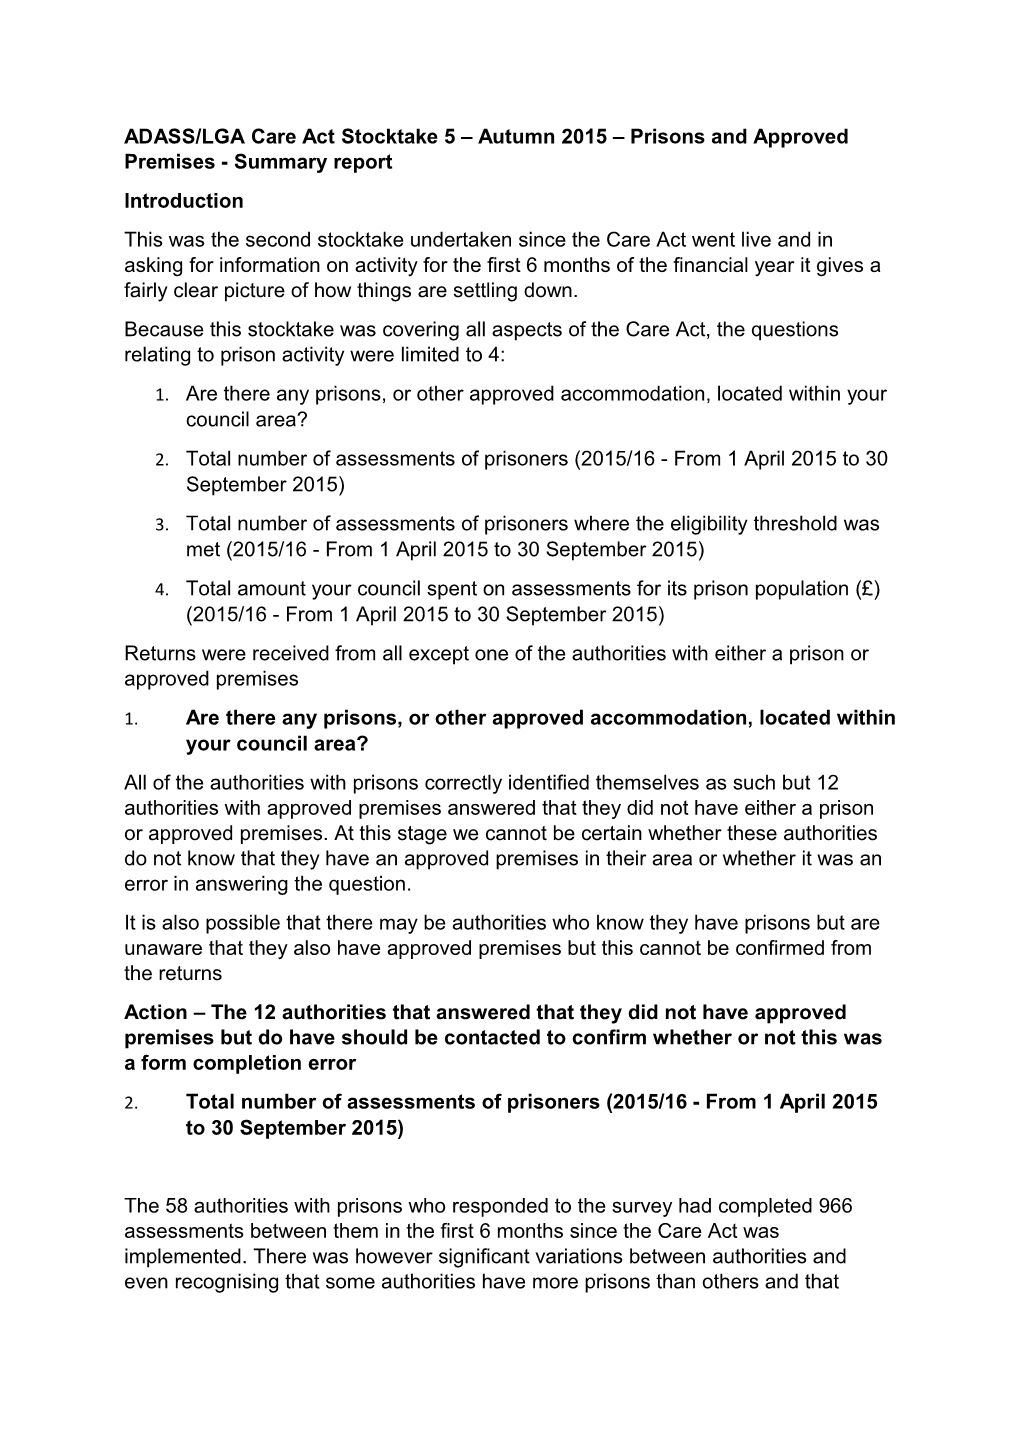 ADASS/LGA Care Act Stocktake 5 Autumn 2015 Prisons and Approved Premises - Summary Report